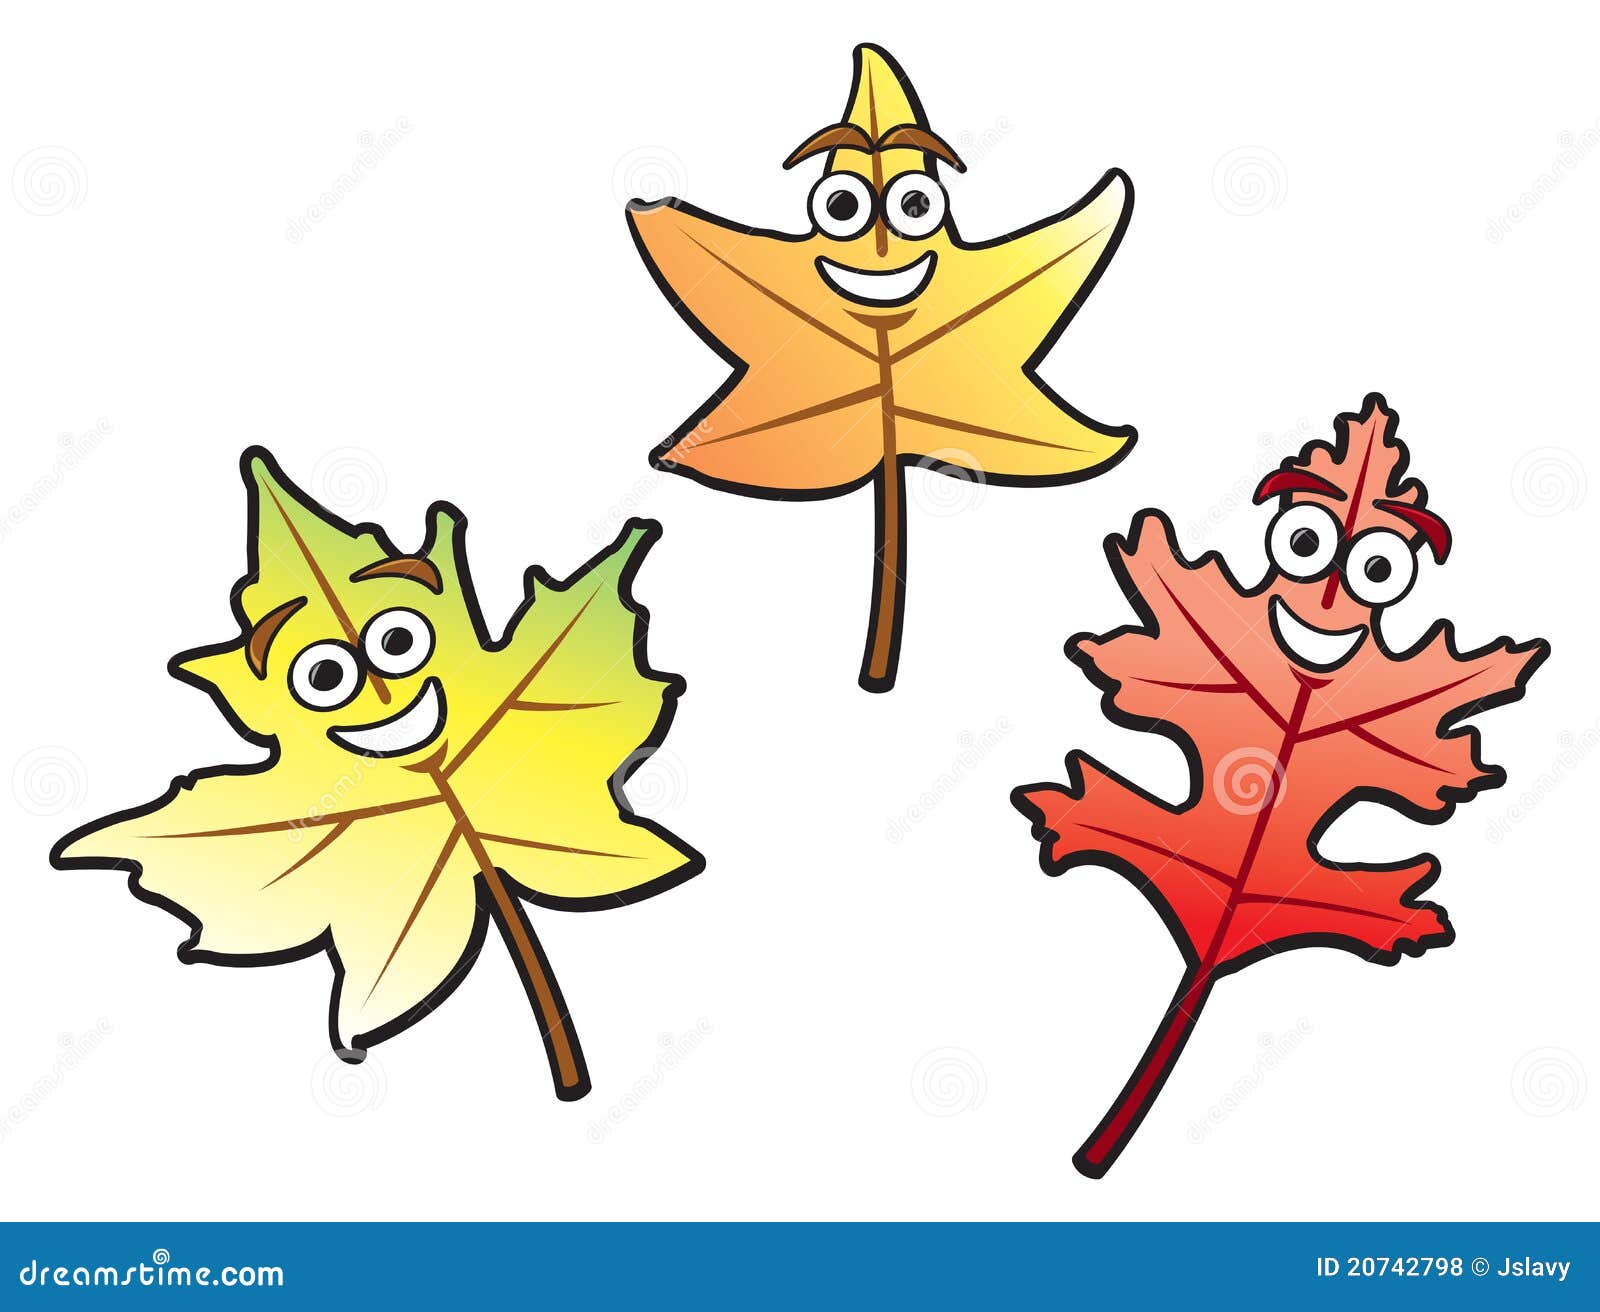 Three autumn leaves of various common types drawn in a fun cartoon 